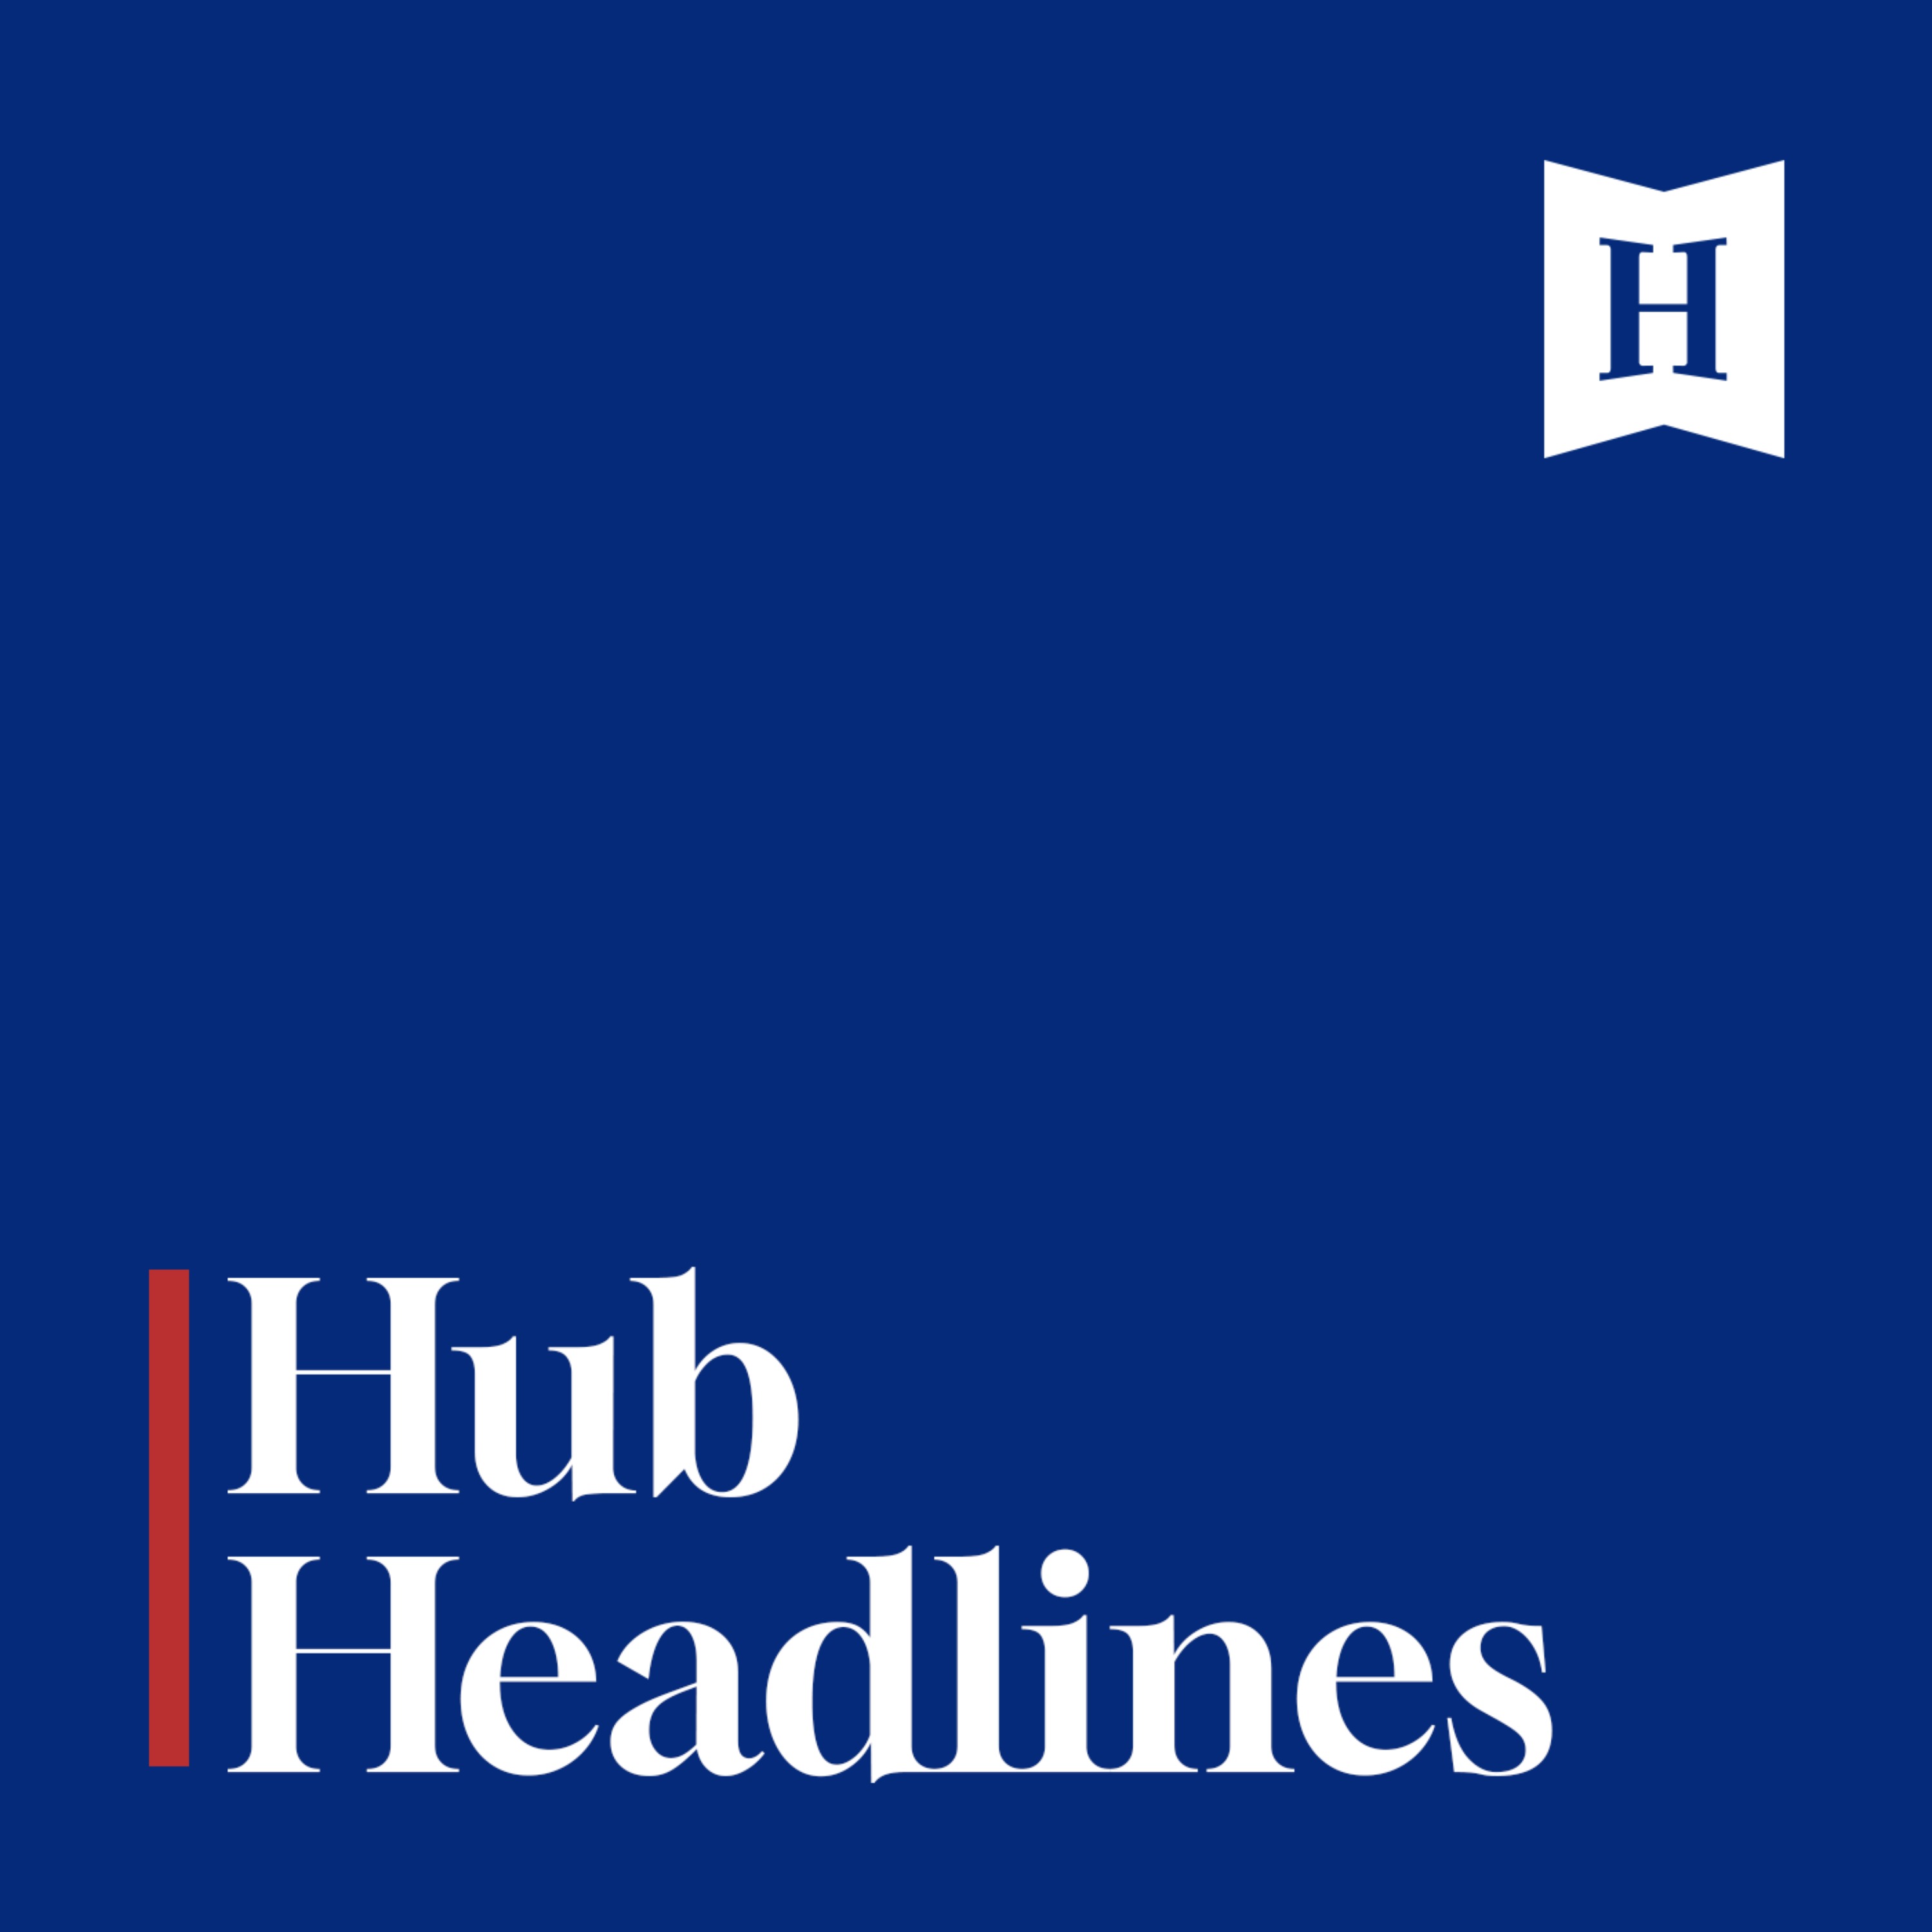 Hub Headlines: Celebrating a post-colonial Victoria's Day